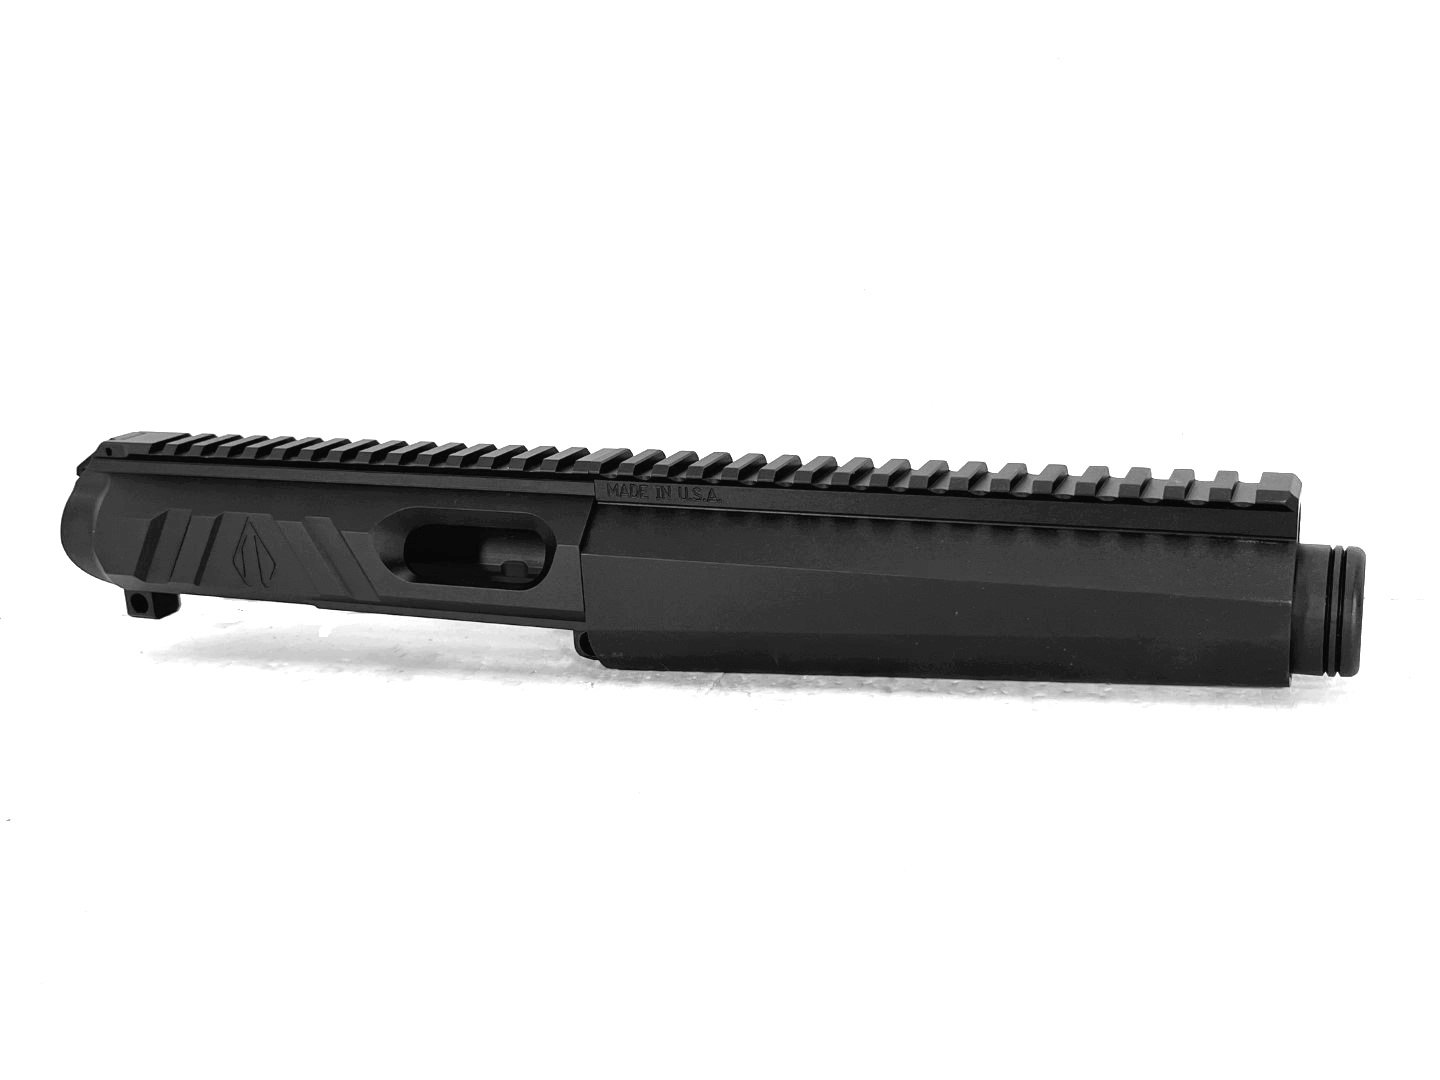 5 inch 40 S&W NR Side Charging PCC Upper MP5 Style